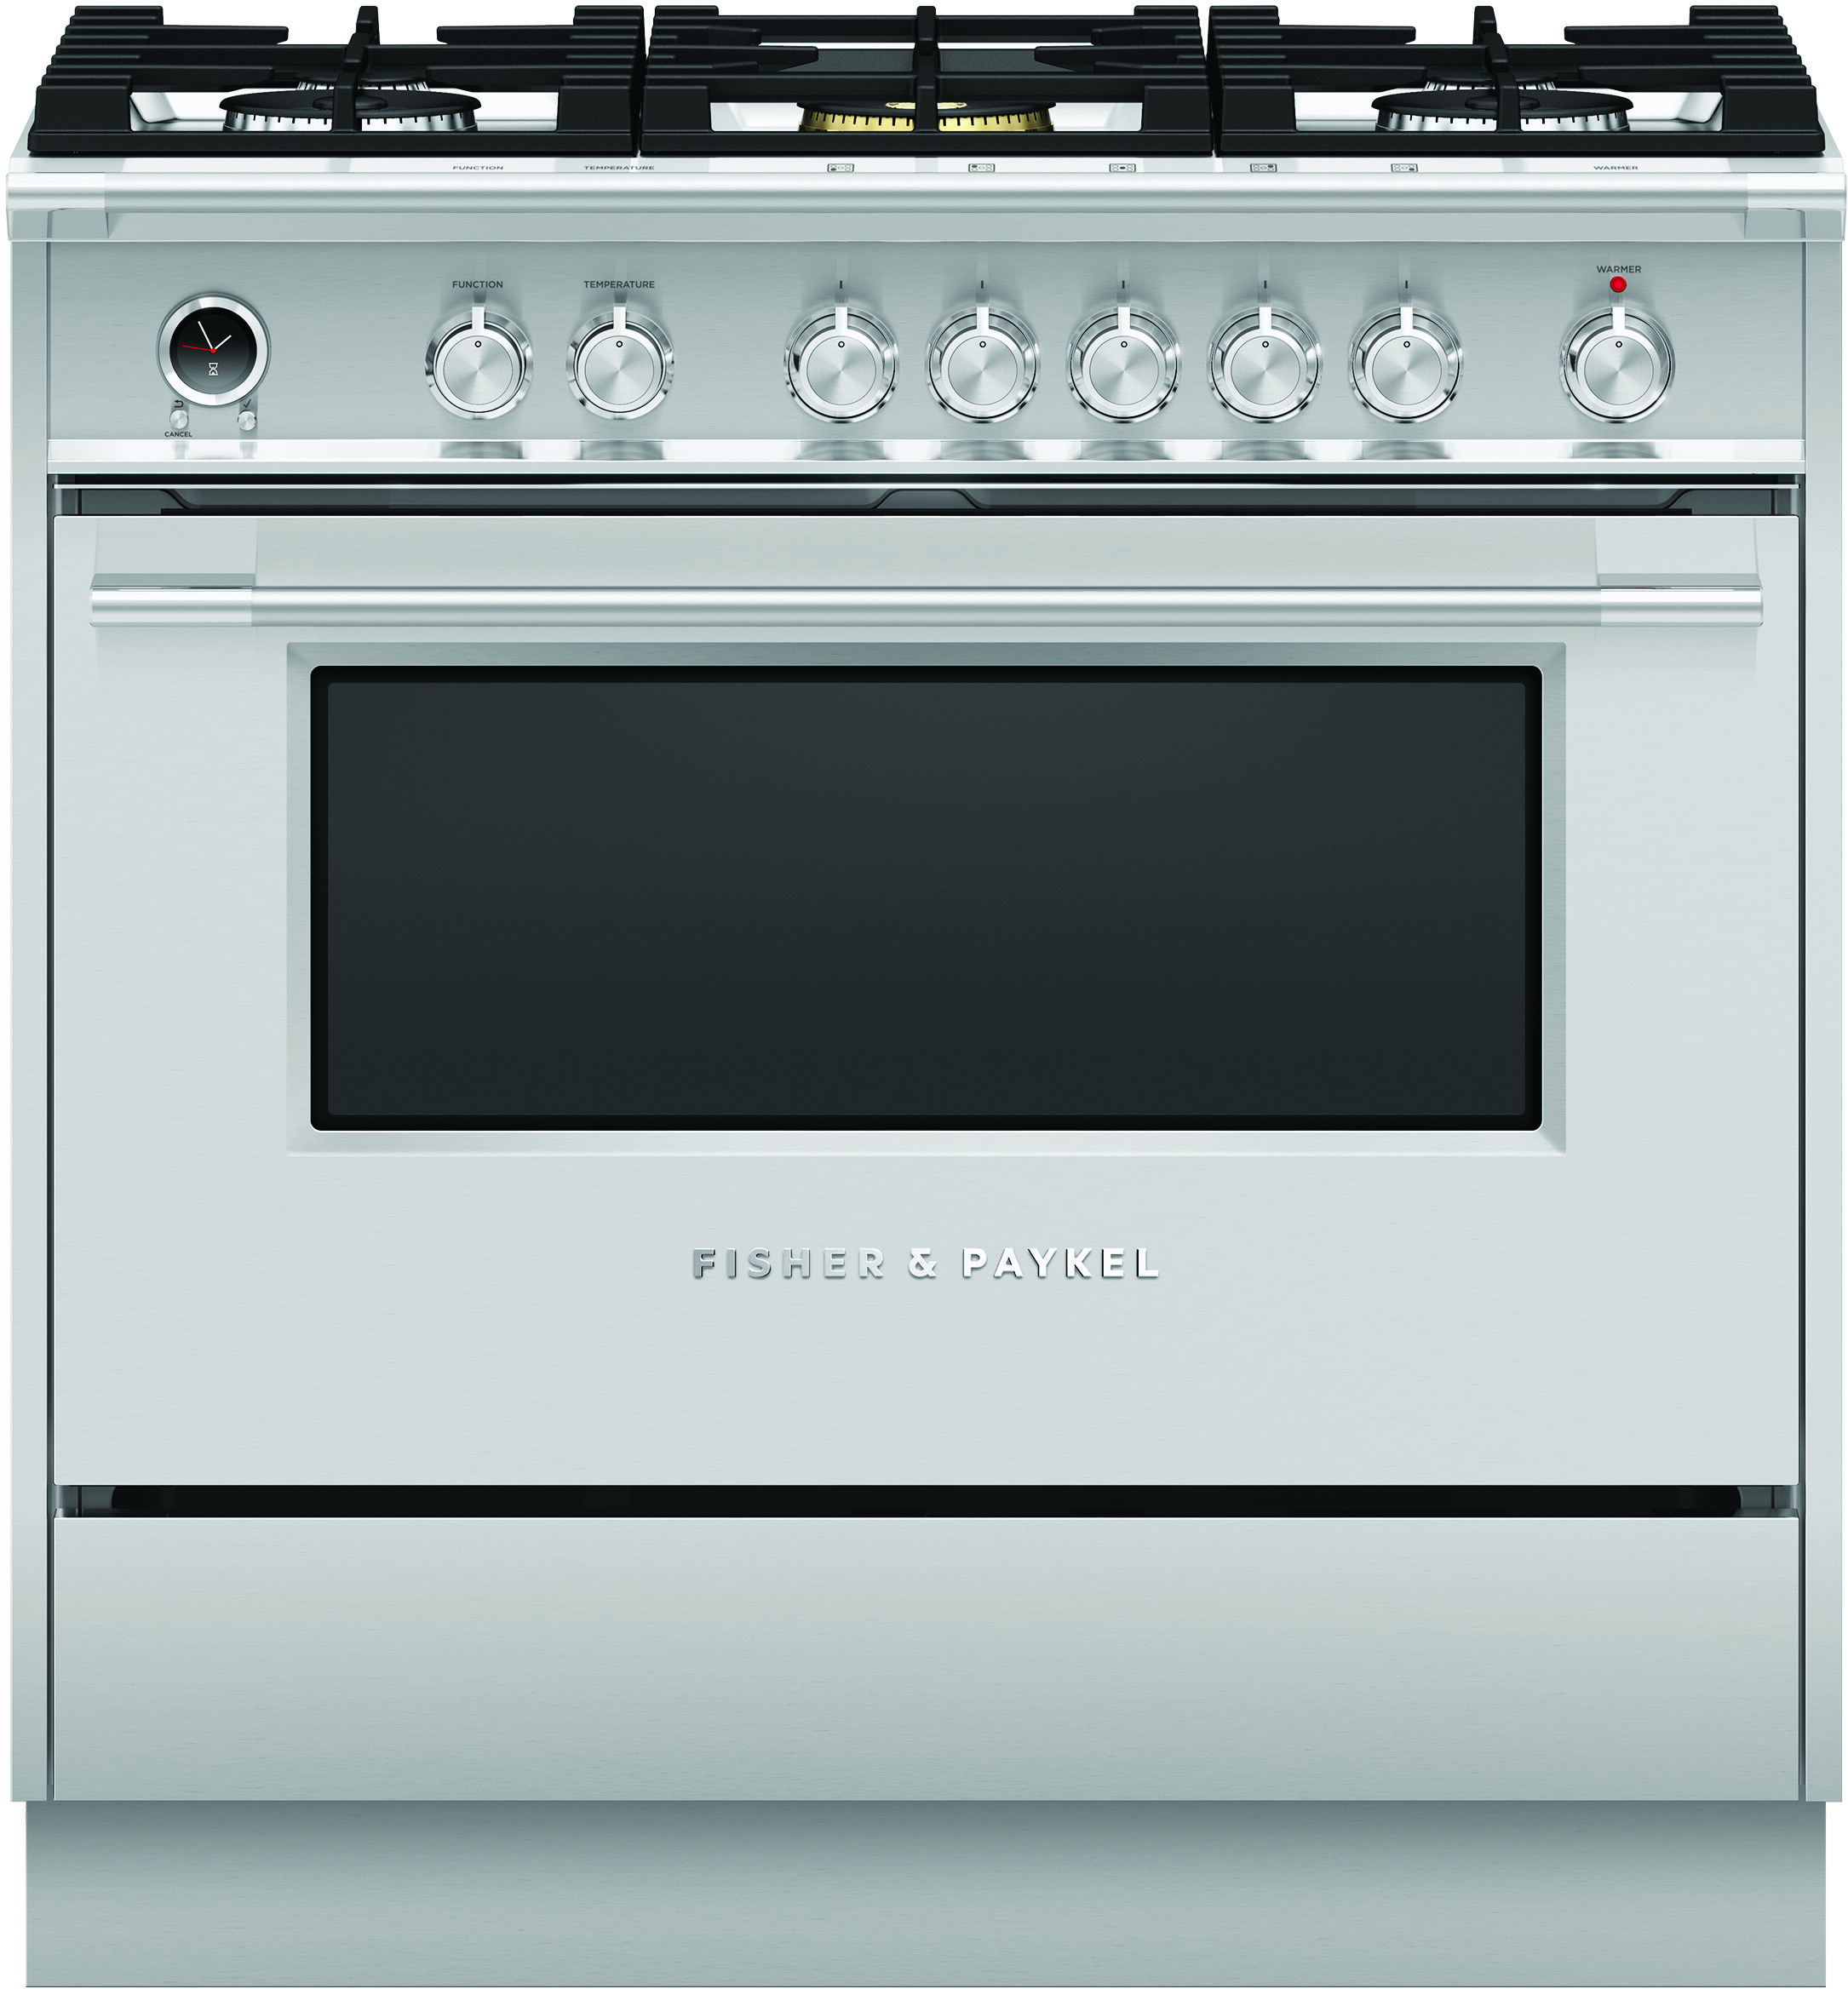 Fisher & Paykel Series 9 classic 36 Freestanding Dual Fuel Natural Gas Range OR36SCG6X1